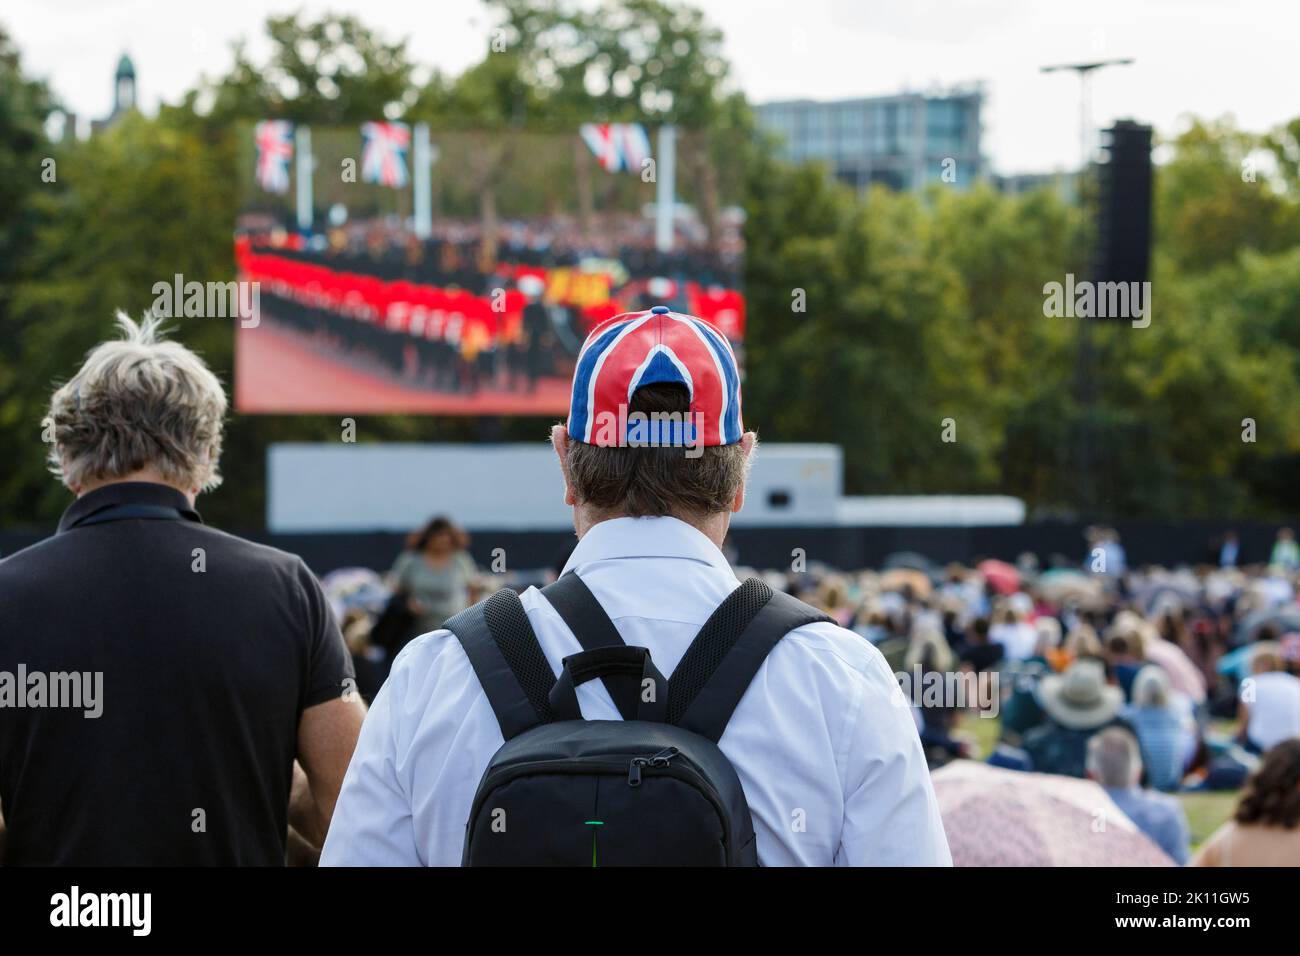 London, UK. 14th Sep, 2022. As crowds of people came to London to watch Her Majesty the Queen's coffin being transported to the Palace of Westminster, large numbers of people are pictured watching the event on large video screens in Hyde Park, London. Credit: Lynchpics/Alamy Live News Stock Photo